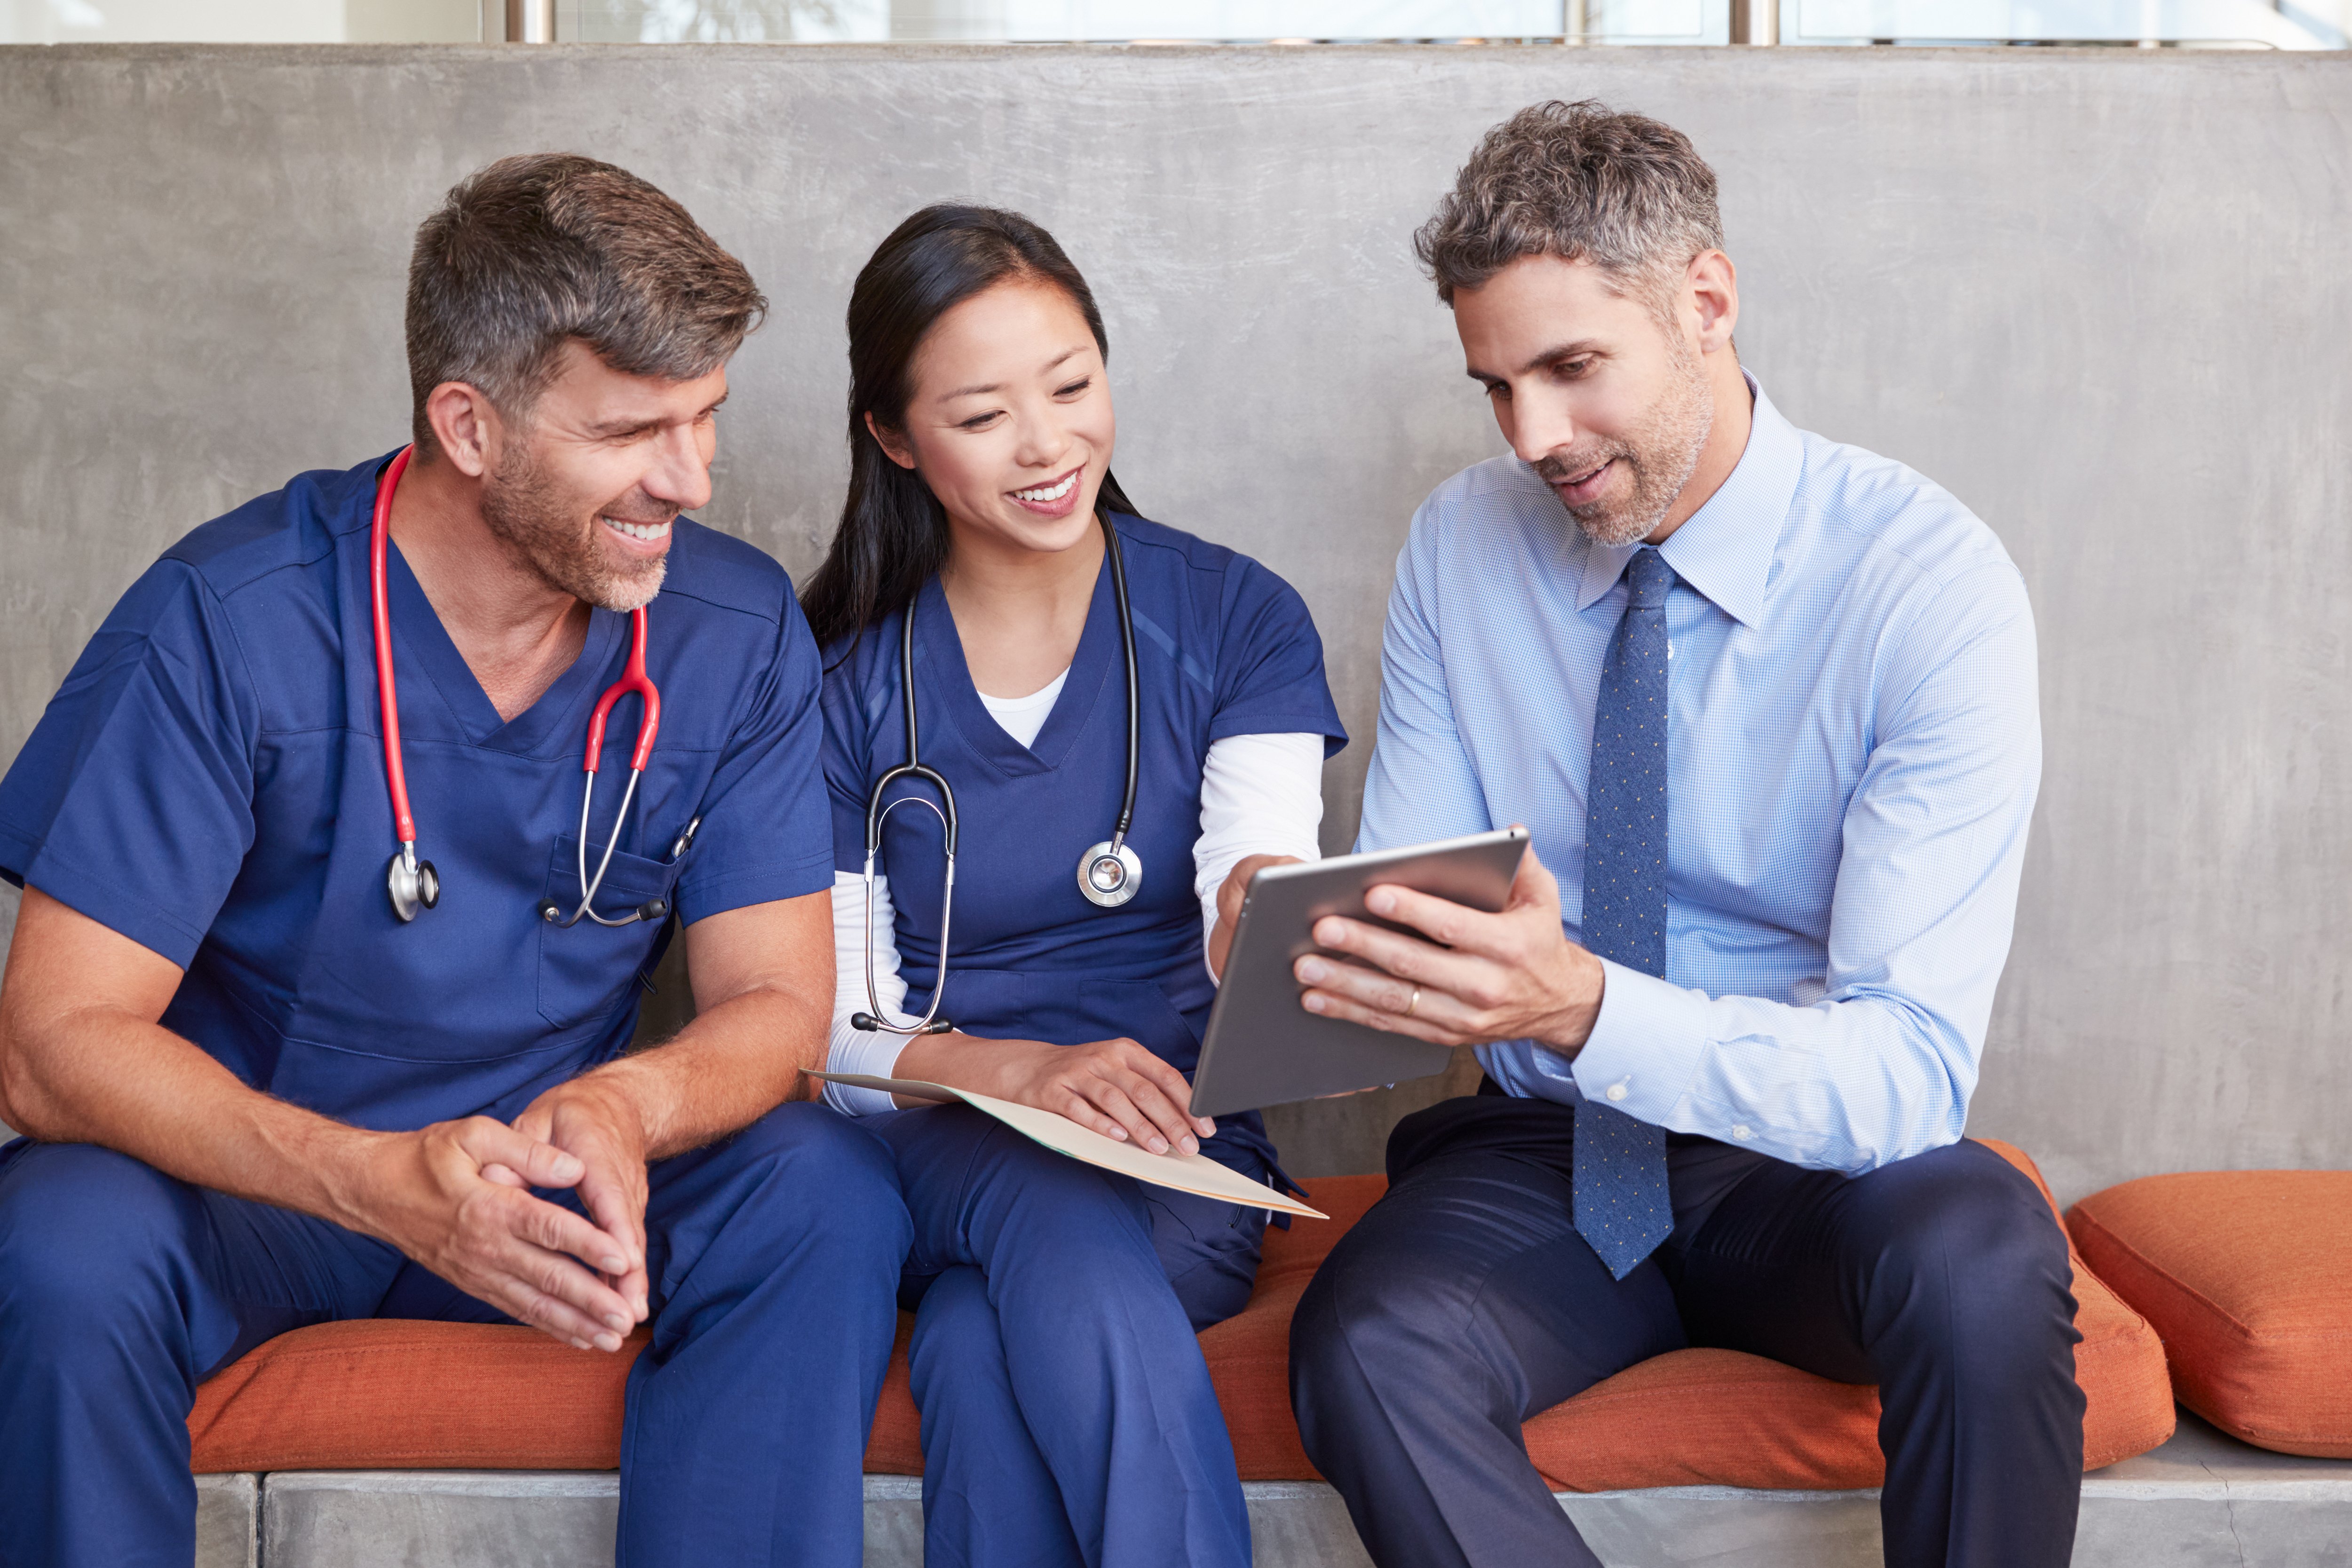 An Innovative Workforce Solution to Change the Way Healthcare Organizations Staff Their Hospitals